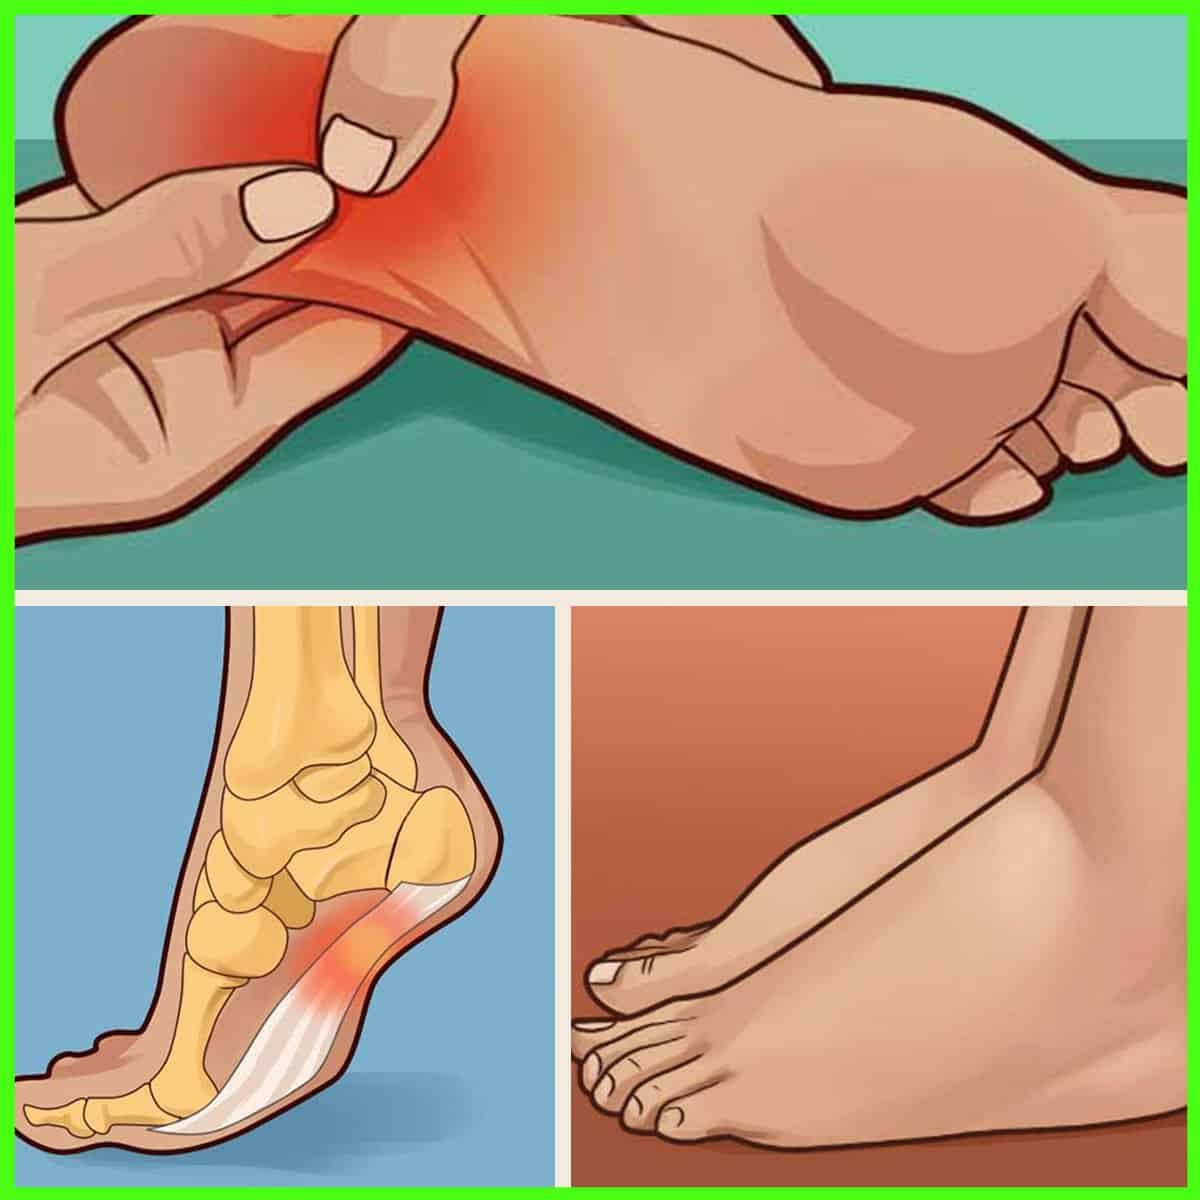 How to Massage a Swollen Foot